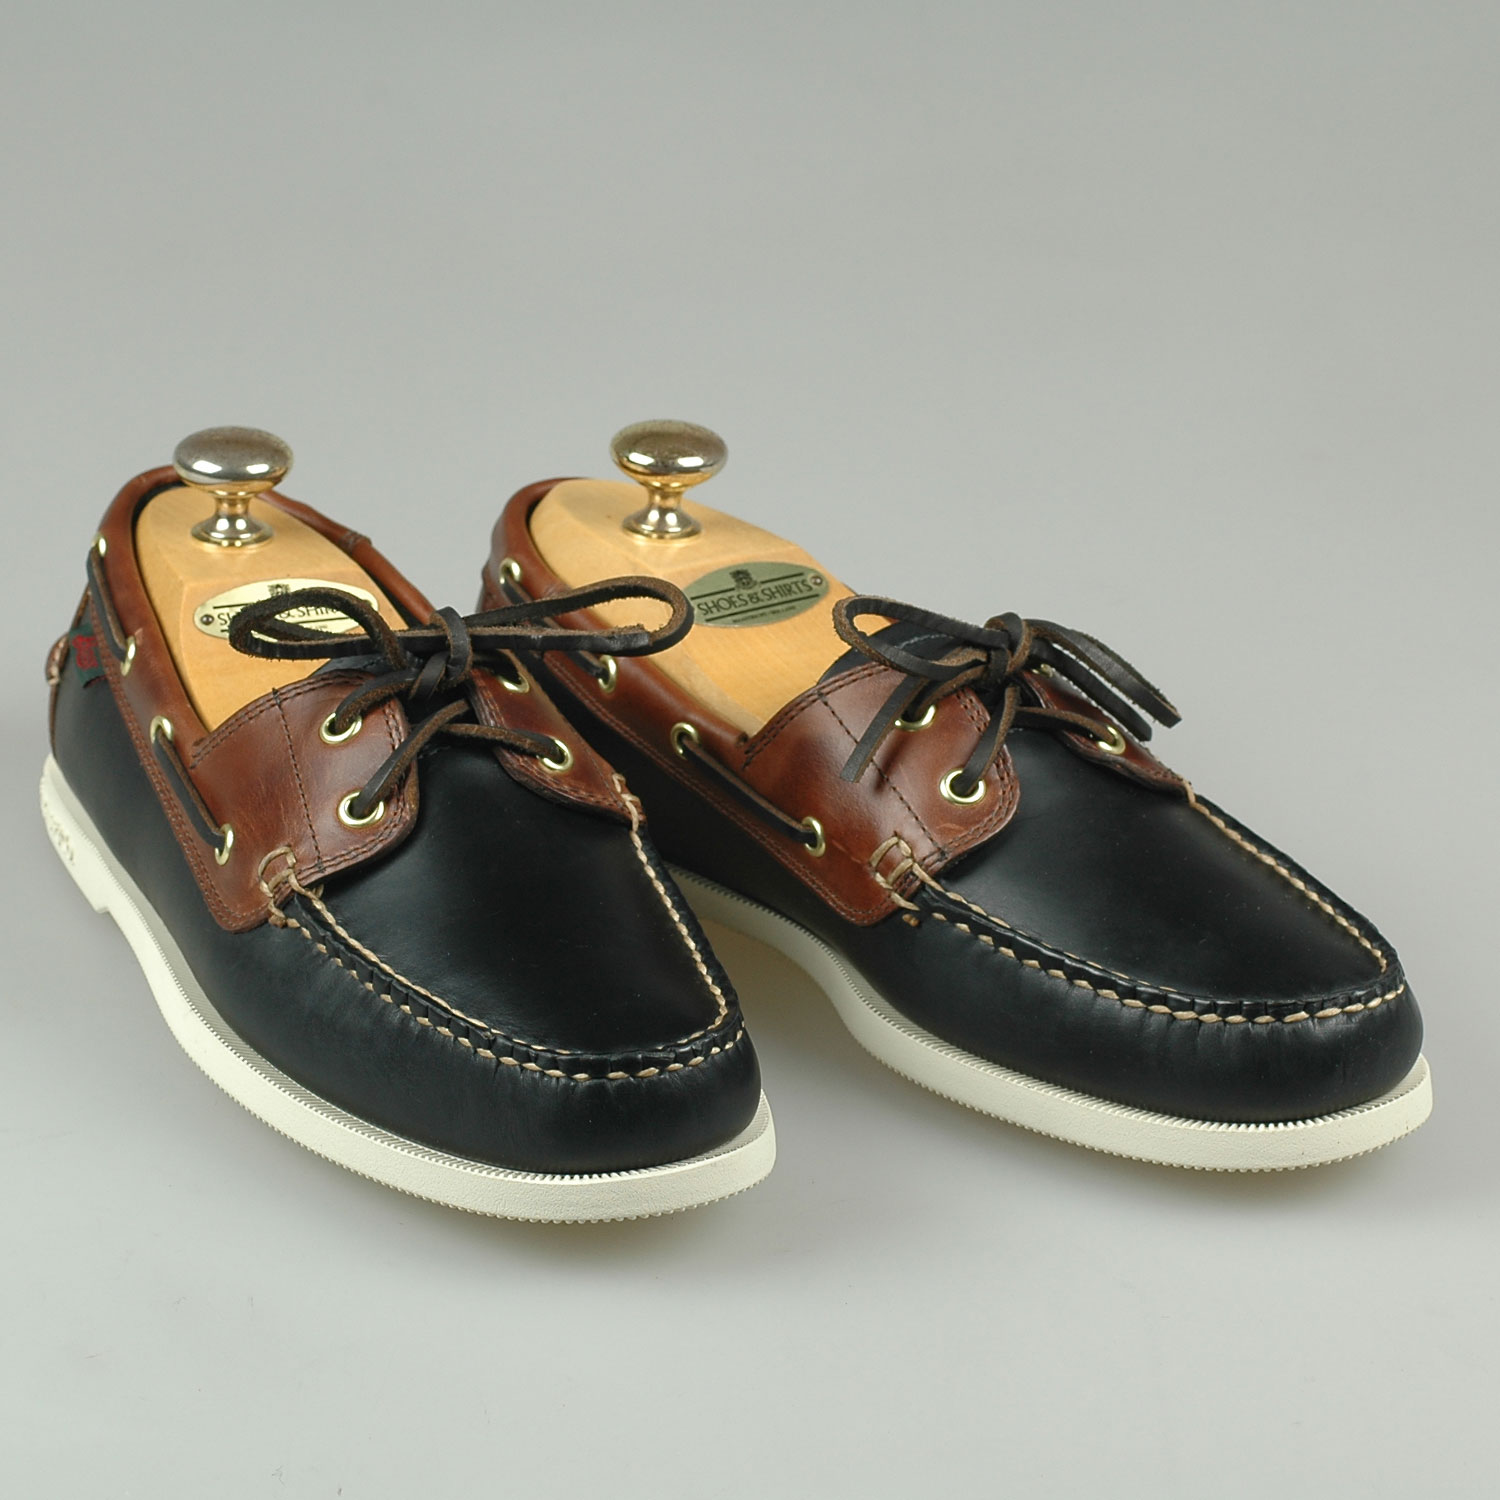 Shop . Bass Classic boat shoe online at Shoes & Shirts